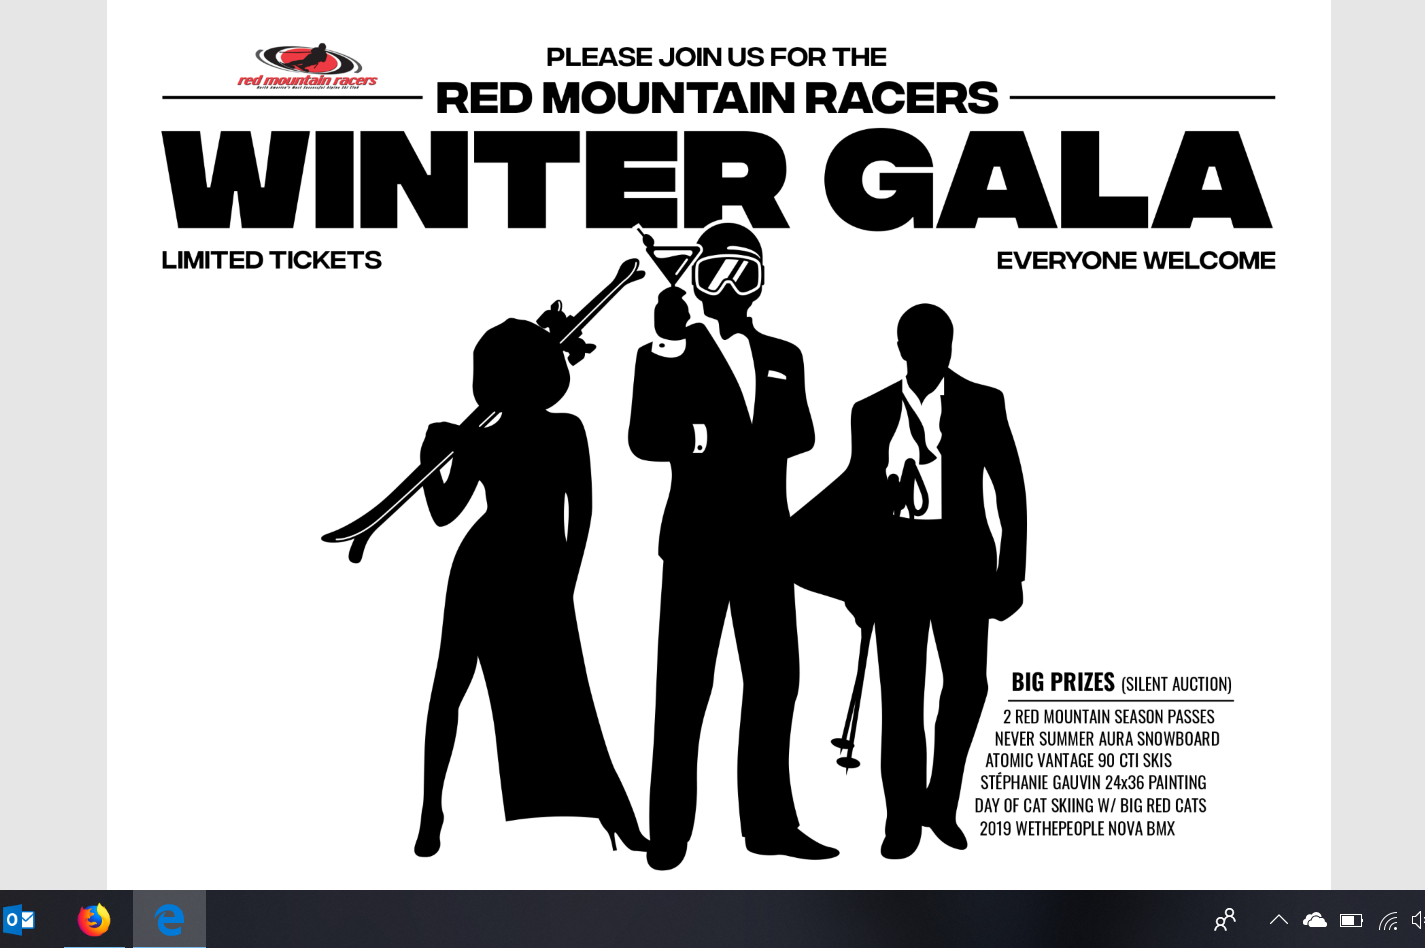 Red Mountain Racers Winter Gala, James Bond style